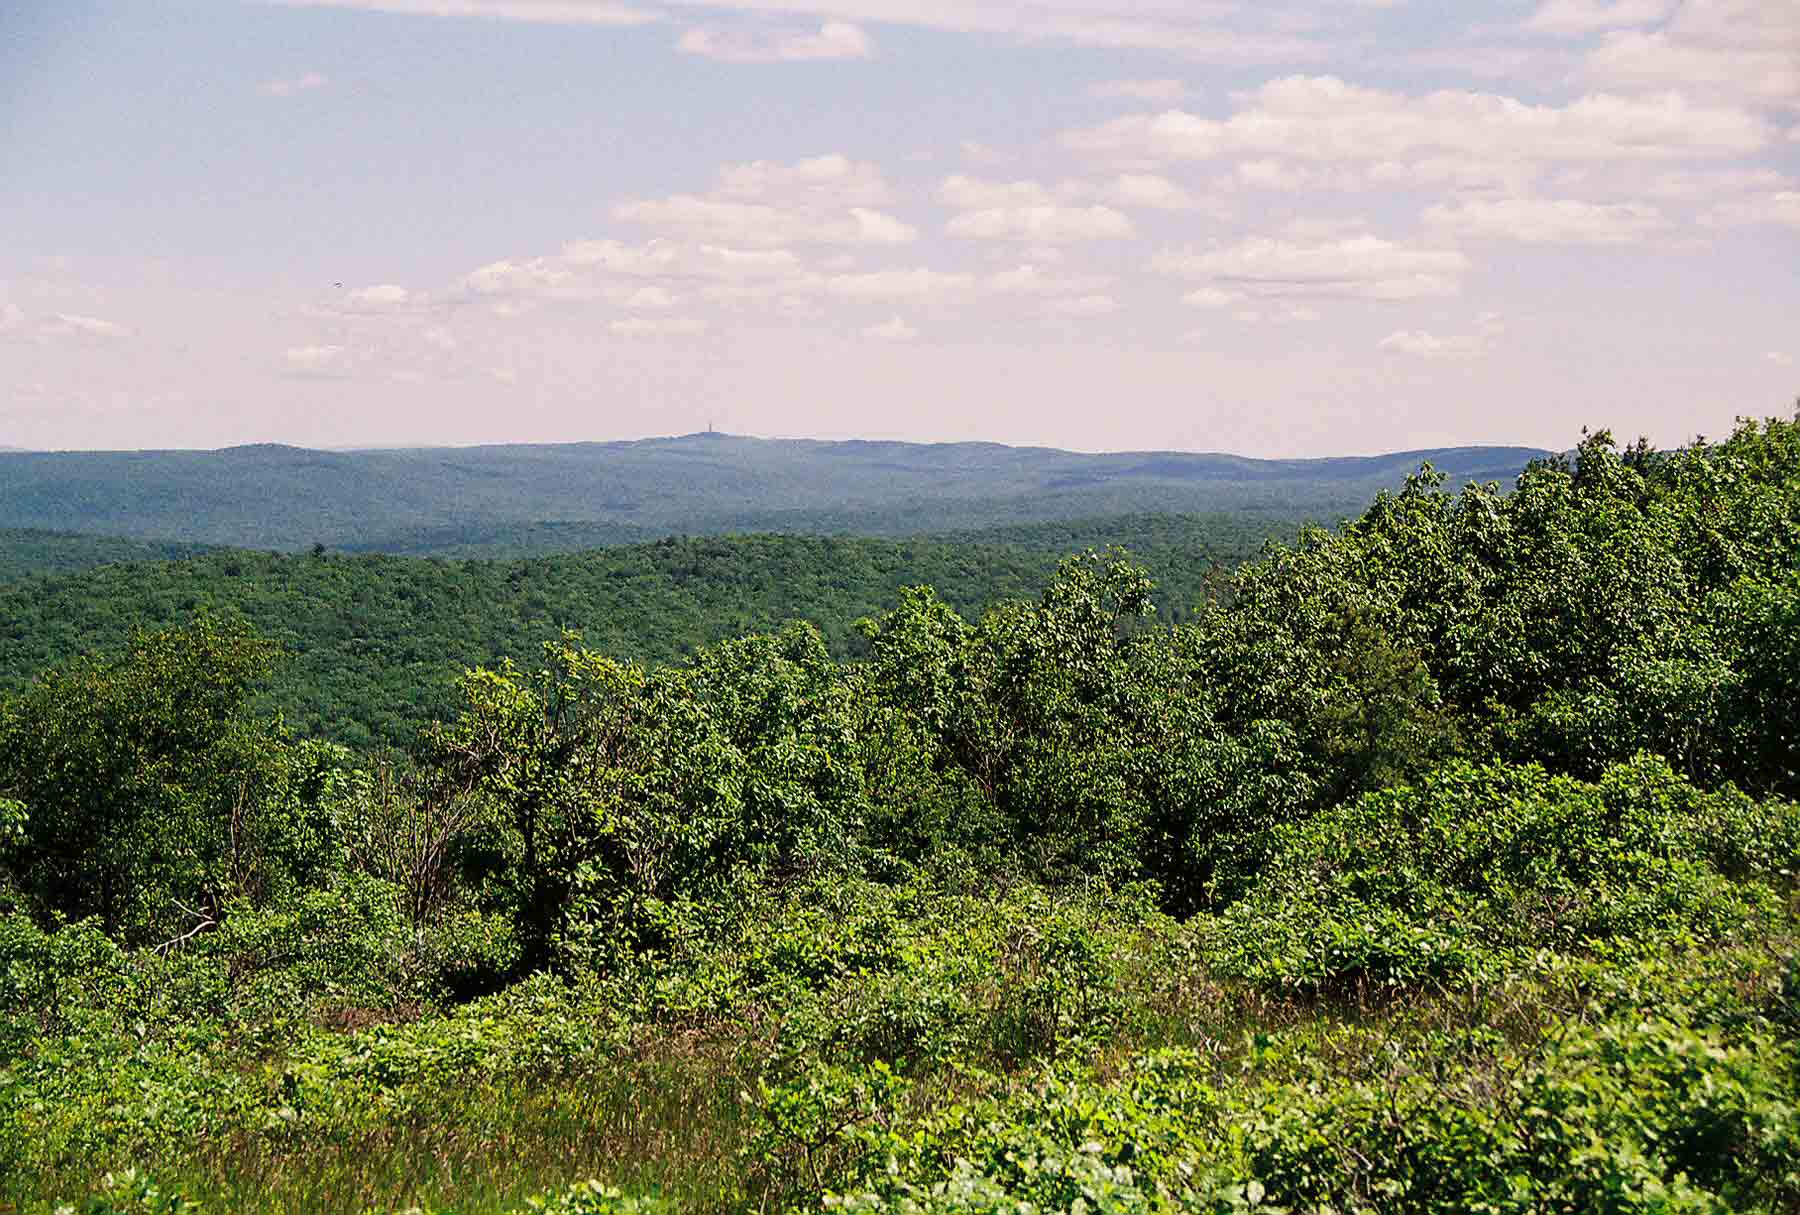 mm 5.0 - View N along ridge from Bird Mt. which is north of Rattlesnake Mt. The tower on top of HIgh Point (highest point in NJ) can be seen in distance (center of picture). Courtesy dlcul@conncoll.edu